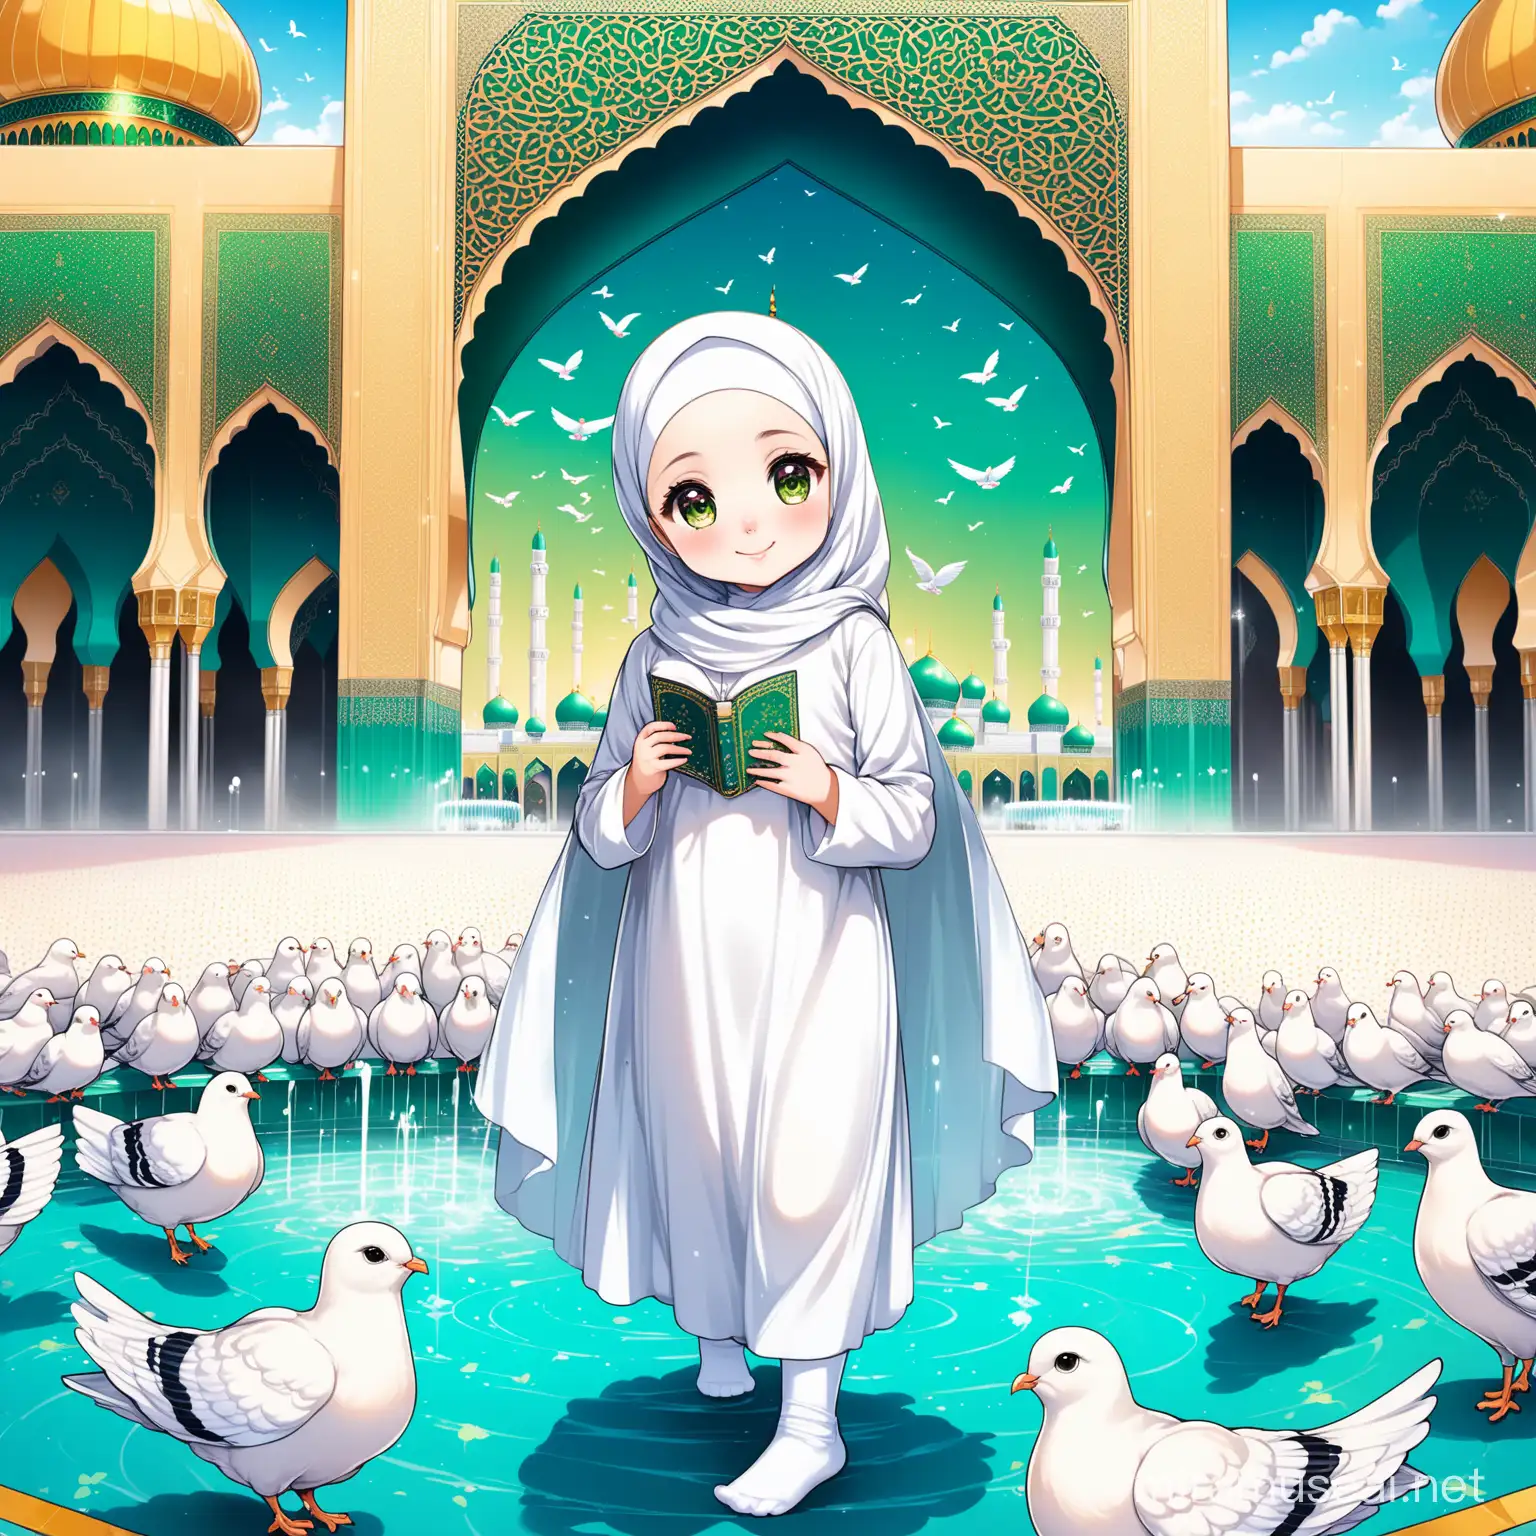 Character Persian little girl(full height, Big white flag in one hand proudly, baby face, Muslim, with emphasis no hair out of veil(Hijab), smaller eyes, bigger nose, white skin, cute, smiling, wearing socks, clothes full of Persian designs).

Atmosphere beautiful shrine of Imam Reza, yard, Colorful, pond with water fountain, many pigeons, nobody.